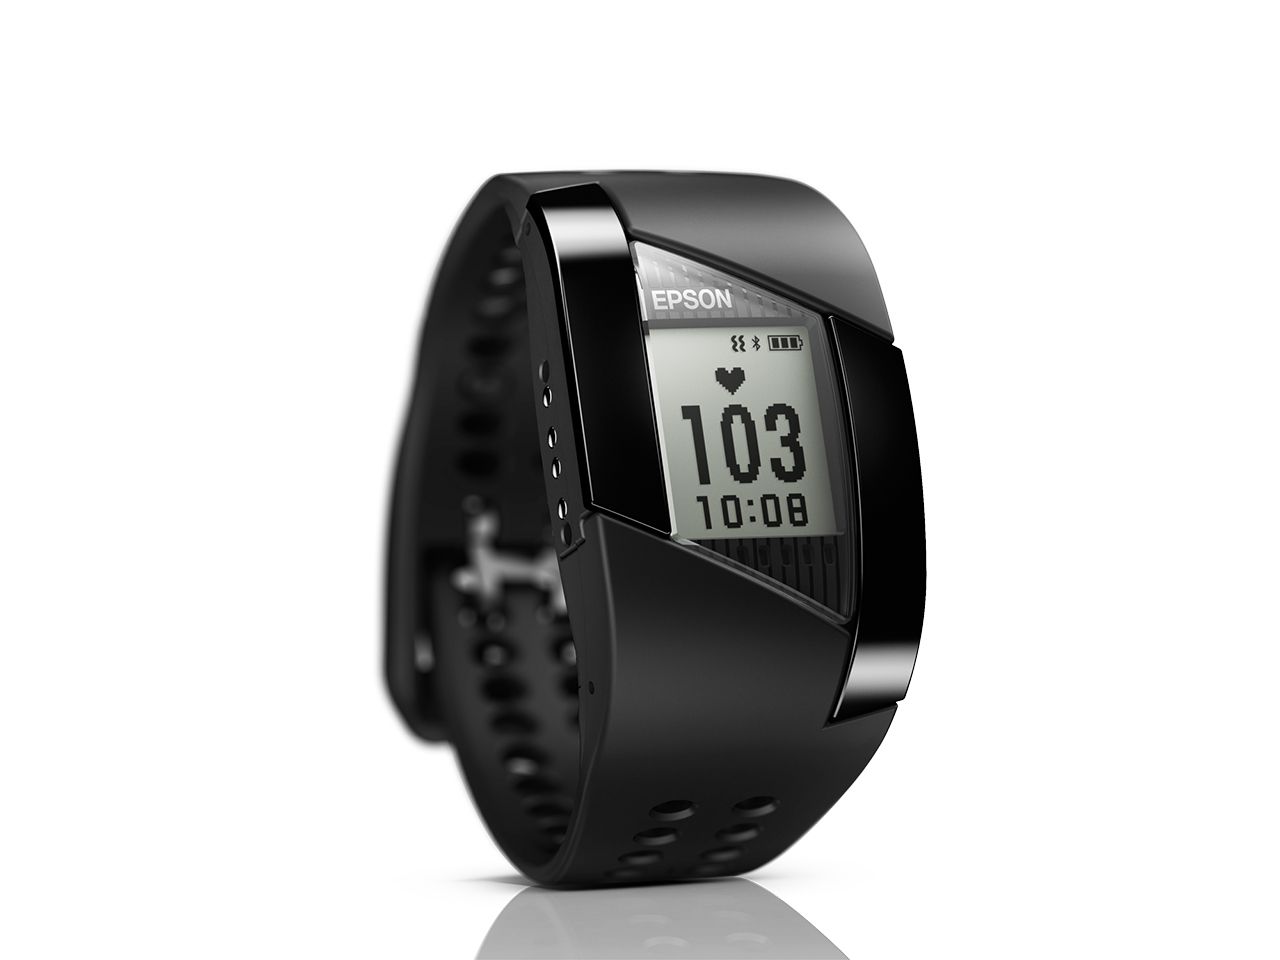 epson gets tracking with runsense gps watches and pulsense hr and activity trackers image 4